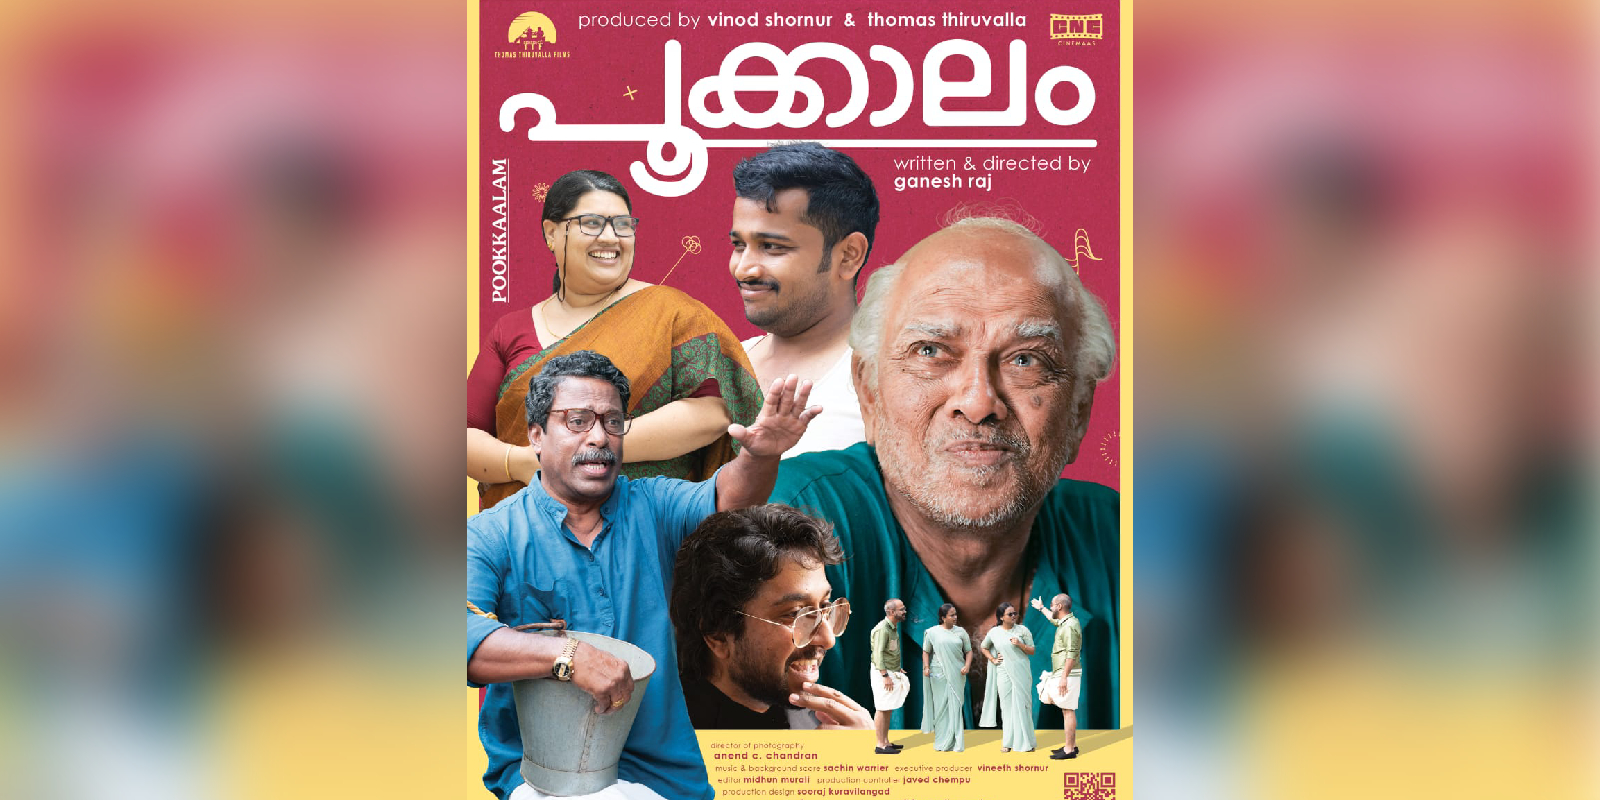 pookalam movie review in malayalam